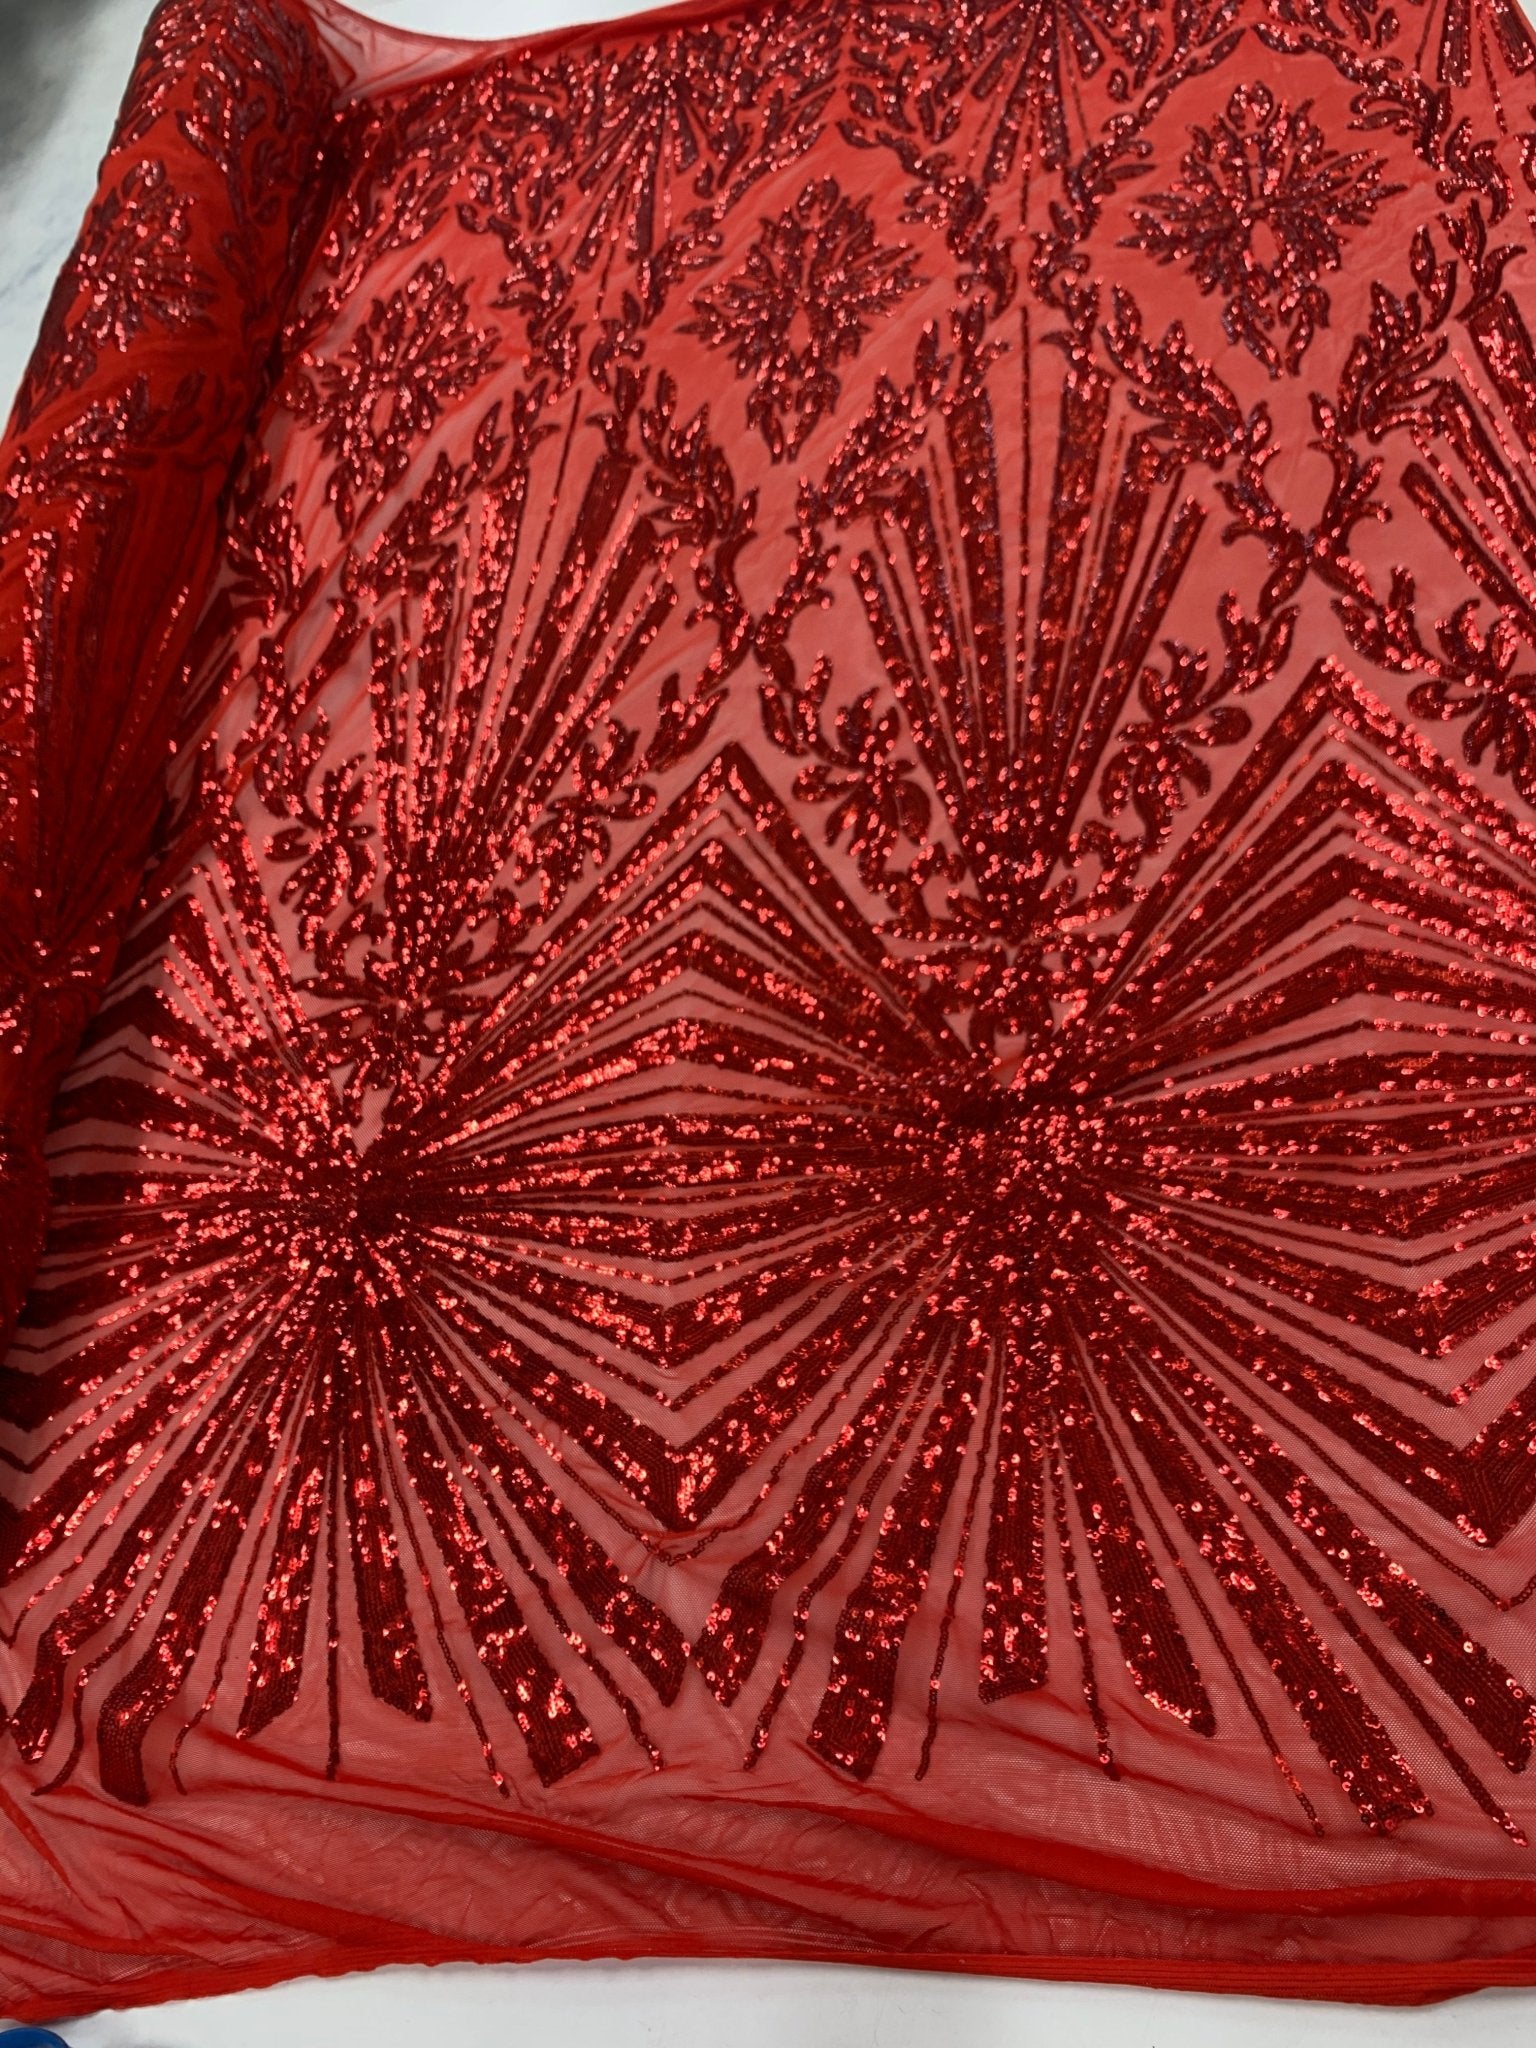 Red Luxury Stretch Sequin Bridal Embroidery on Red Mesh Lace FabricICEFABRICICE FABRICSRedRed Luxury Stretch Sequin Bridal Embroidery on Red Mesh Lace Fabric ICEFABRIC